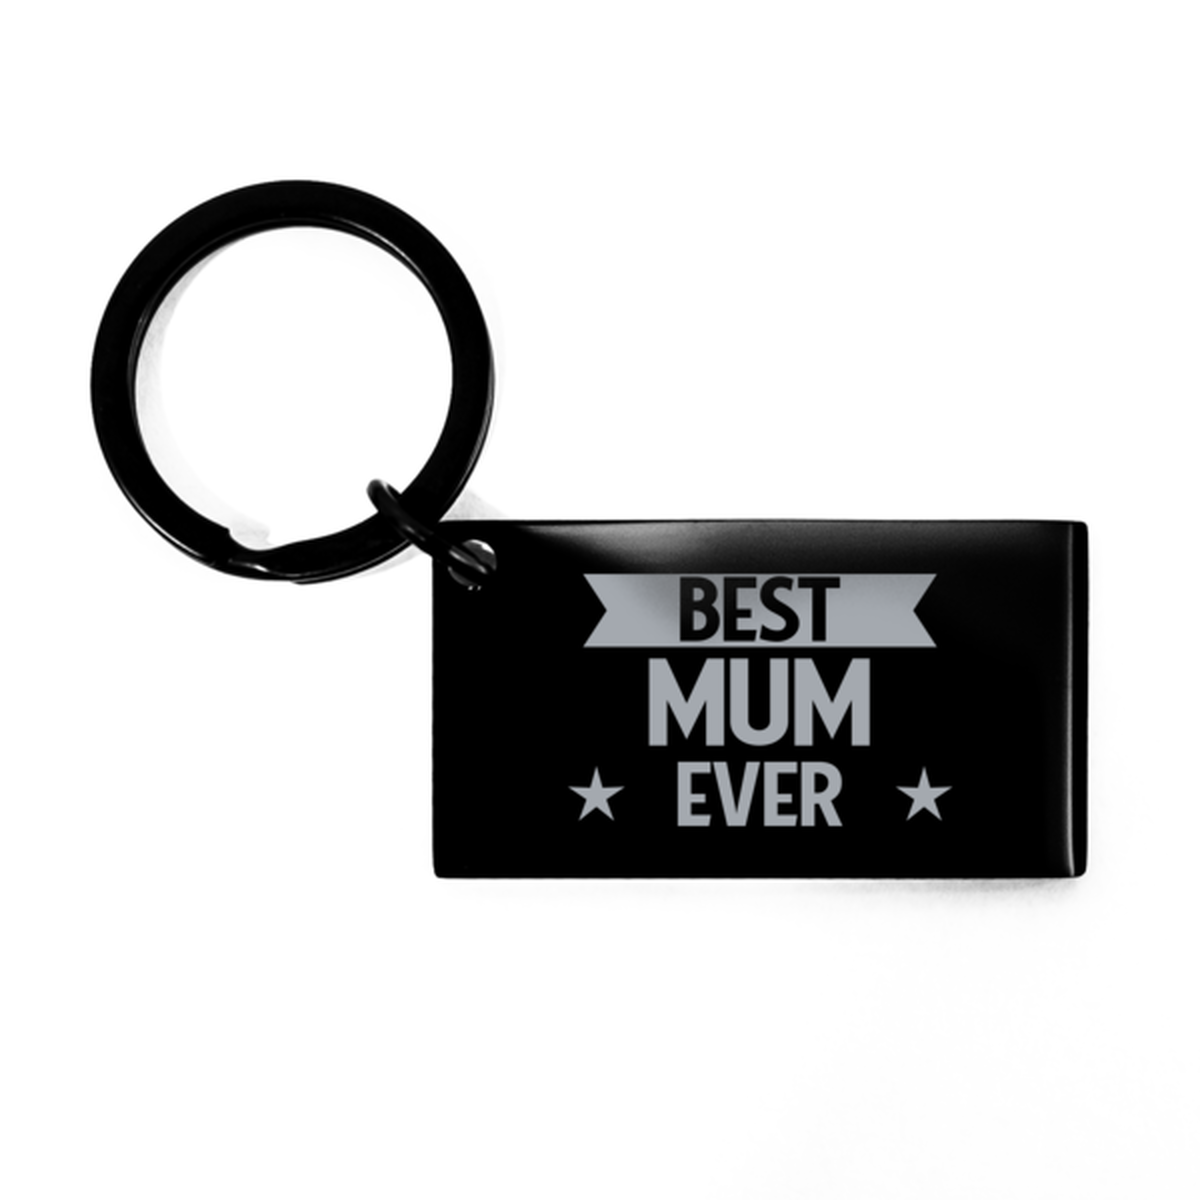 Best Mum Ever Mum Gifts, Funny Black Keychain For Mum, Birthday Engraved Keyring Presents For Women